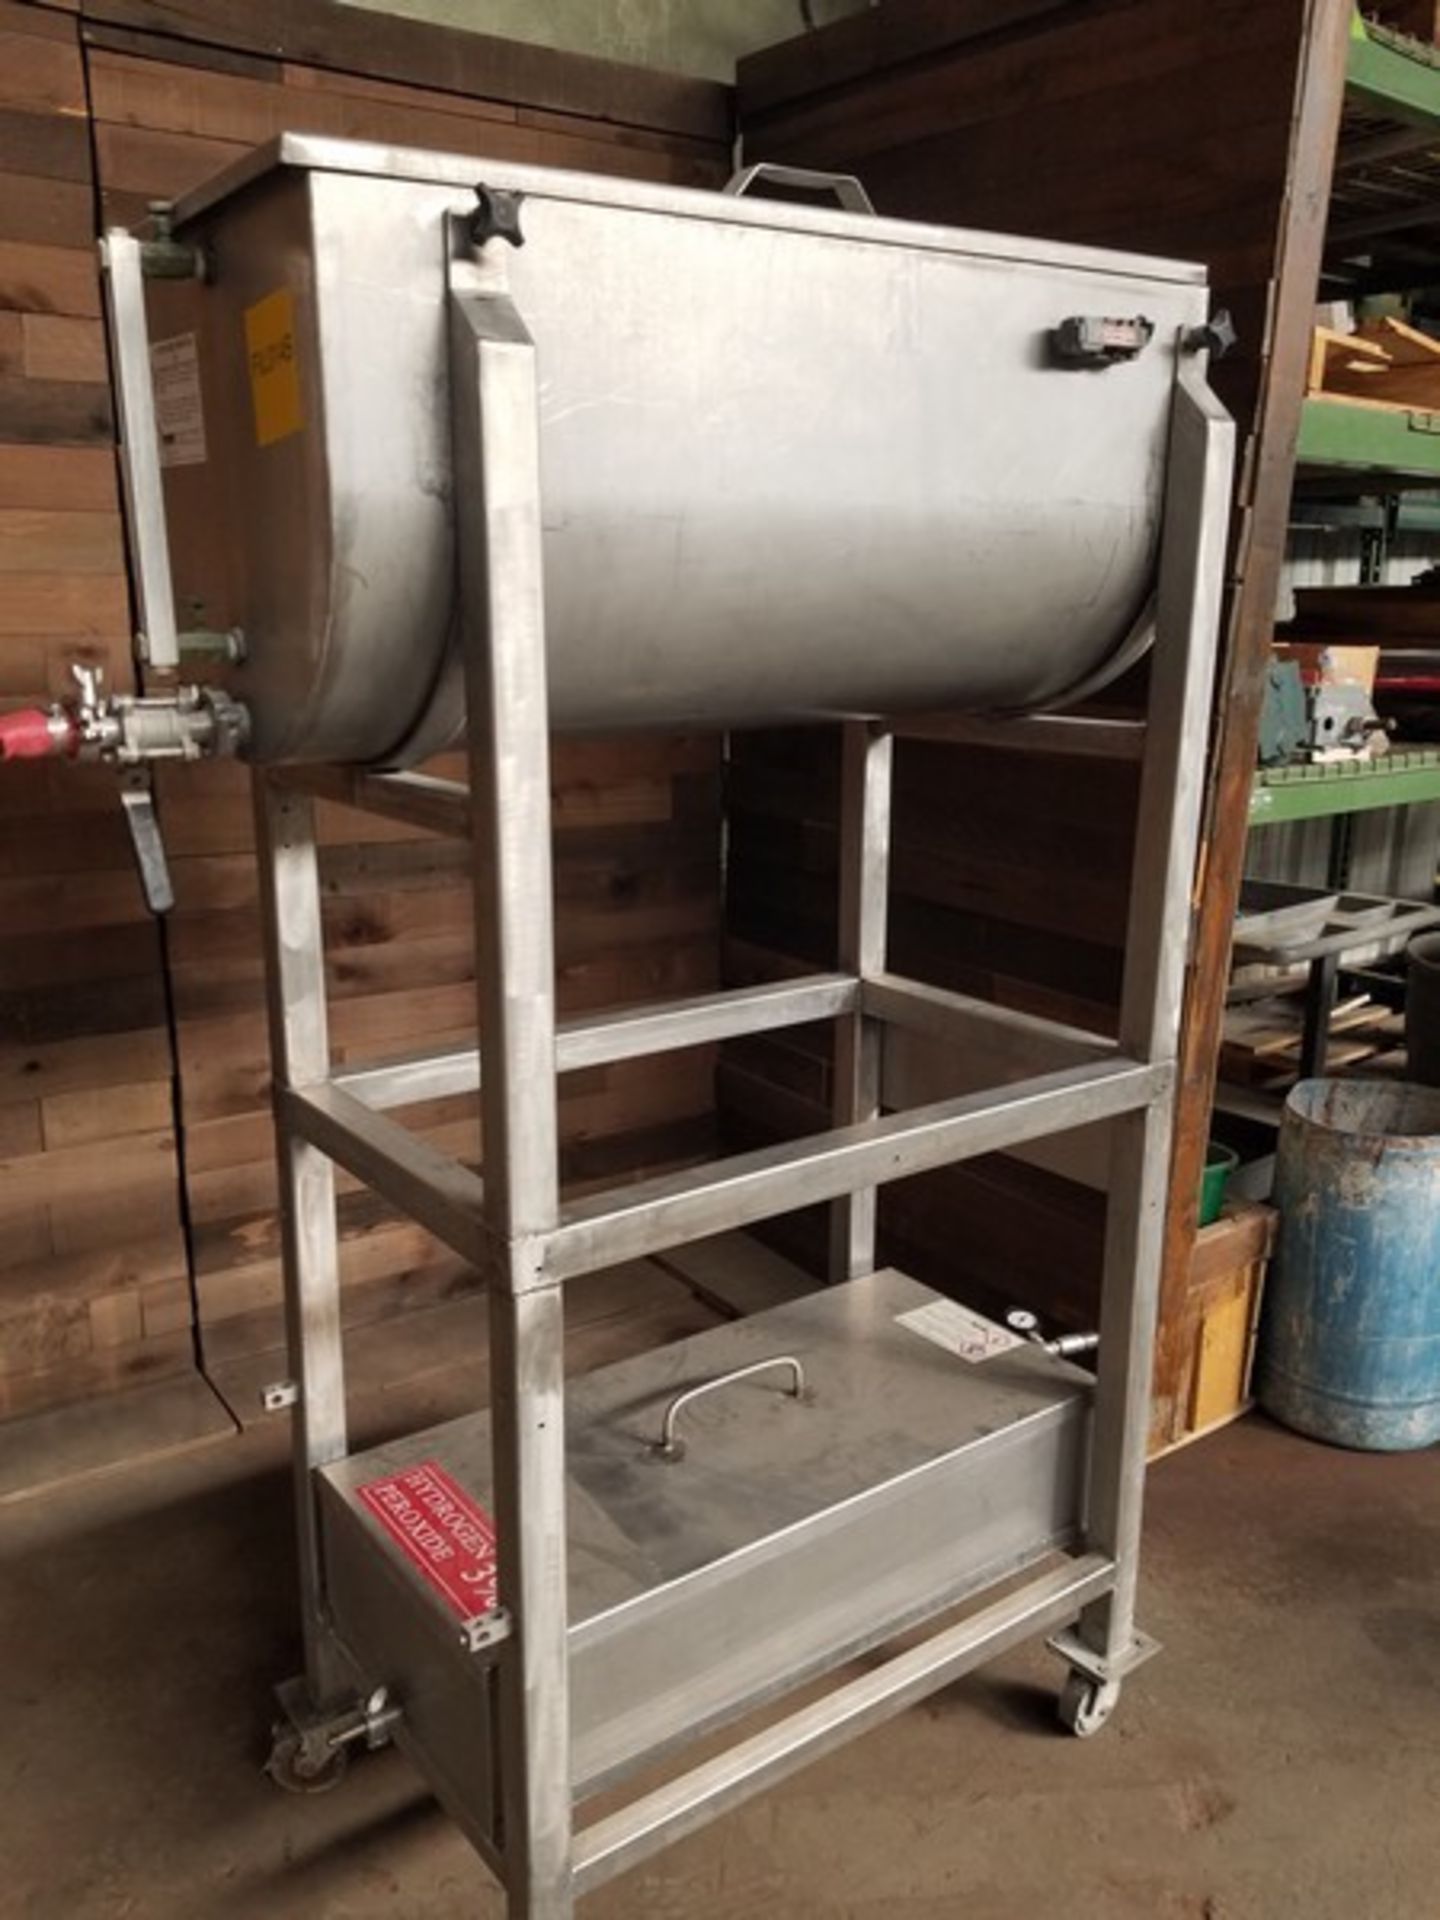 Aprox. 18" W x 40" L x 18" H S/S Holding Tank on Casters and Aprox. 13" W x 36" L x 8" H Lower - Image 2 of 4